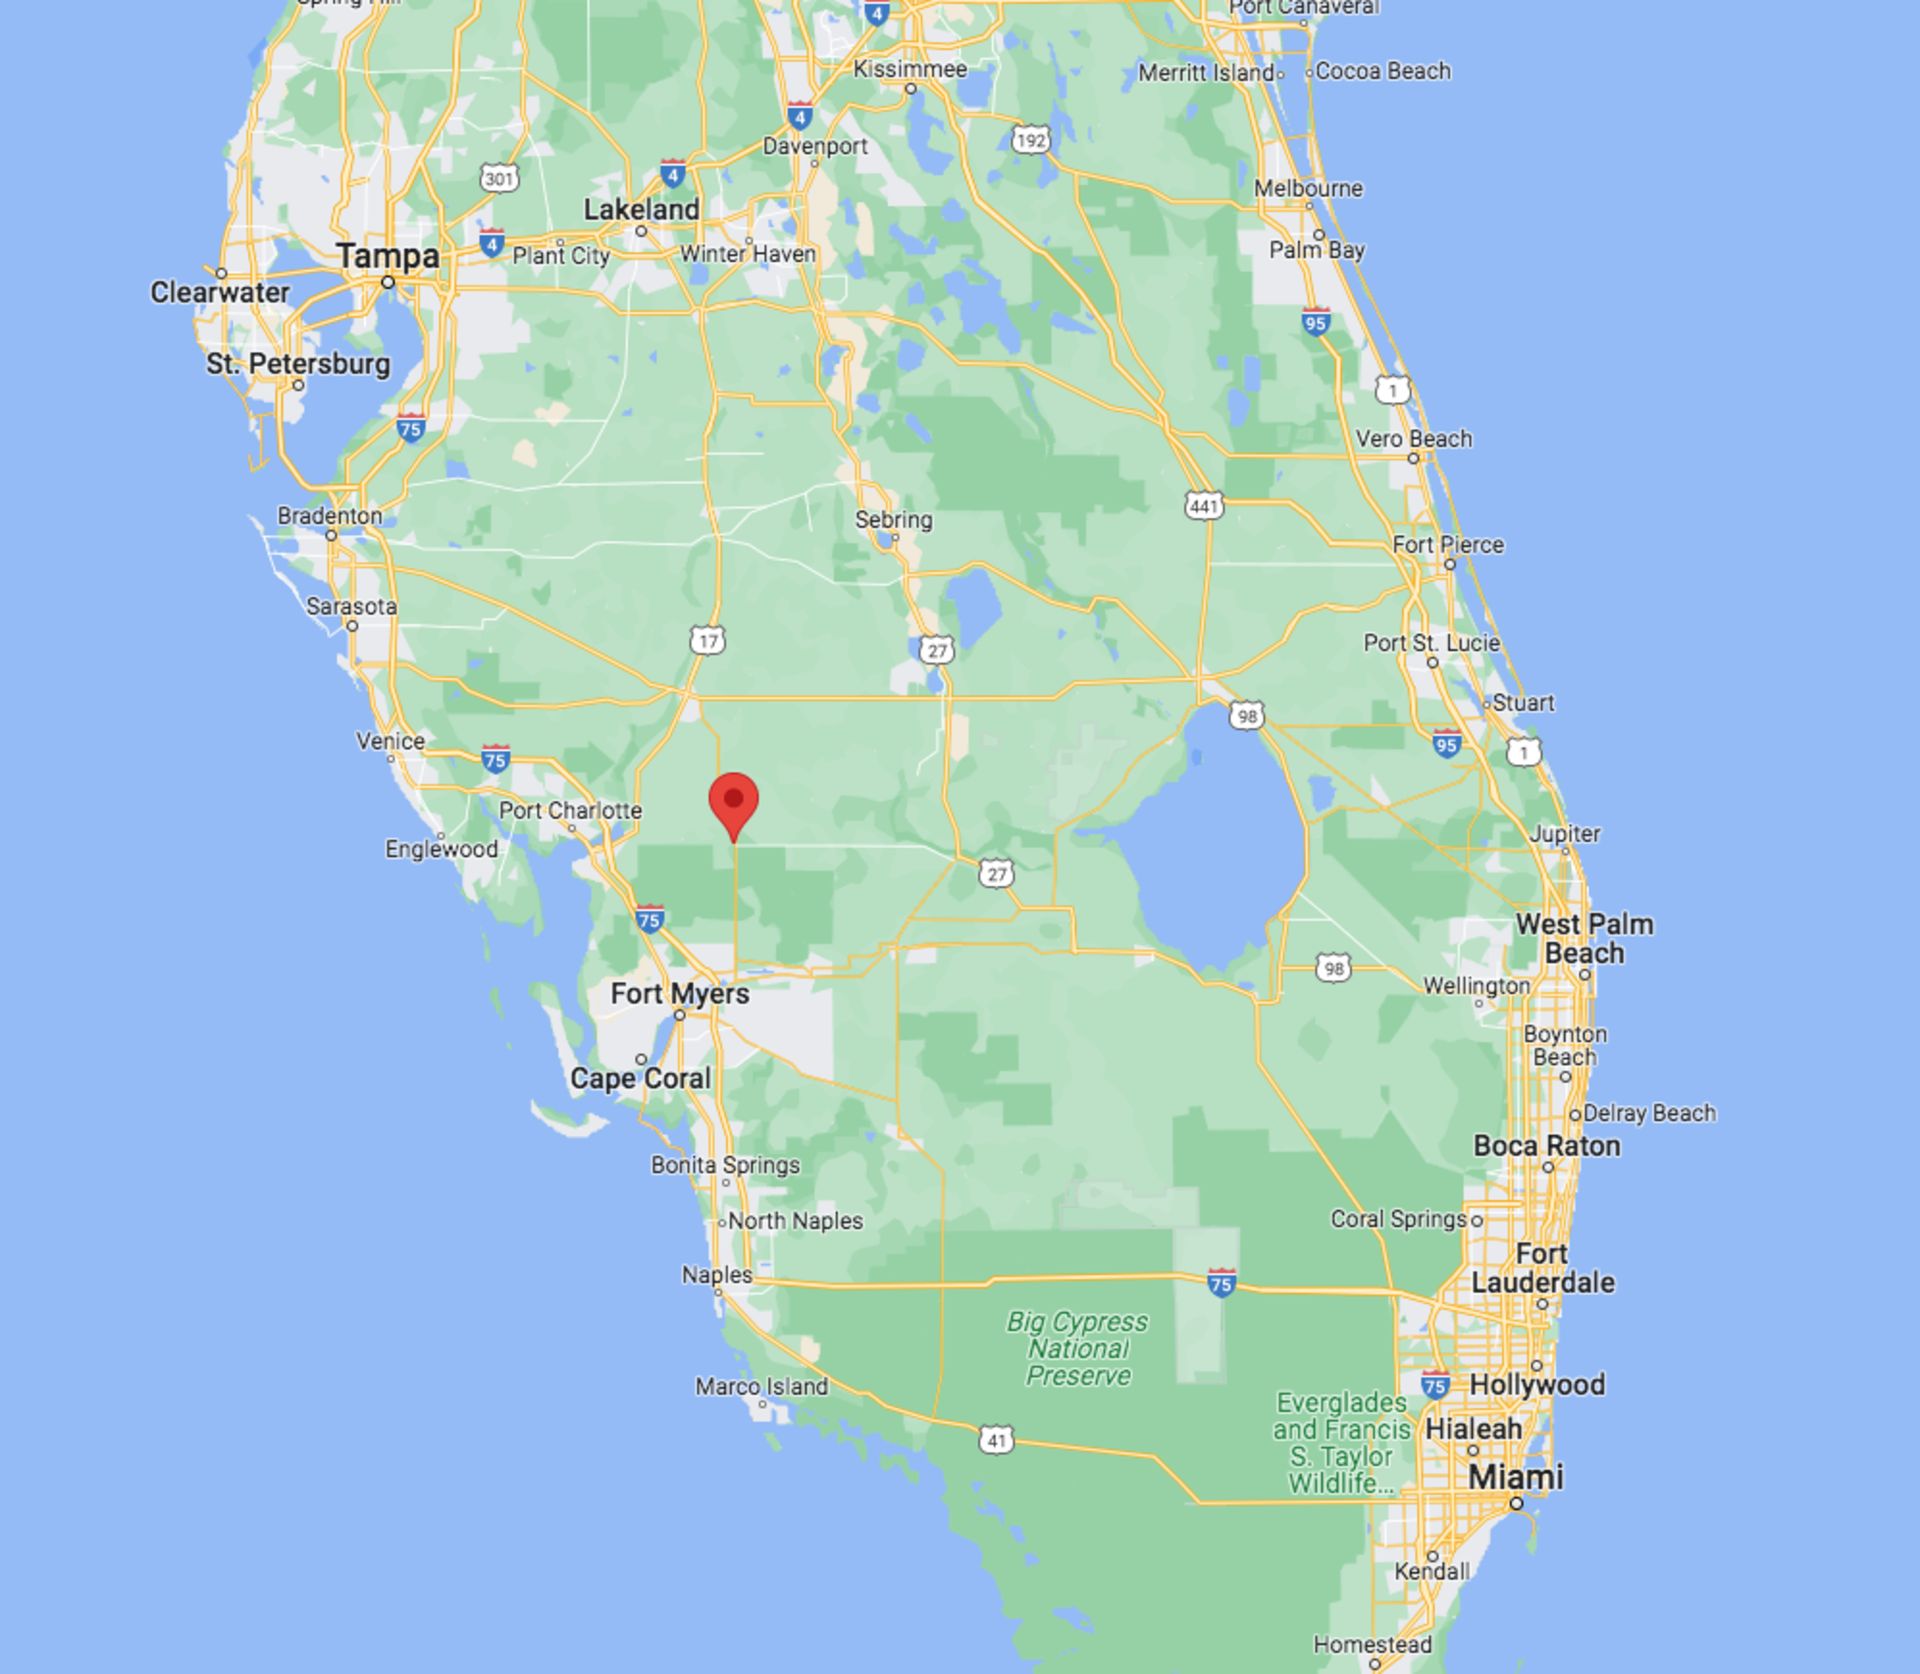 Claim This Slice of Charlotte County, Florida! - Image 14 of 14